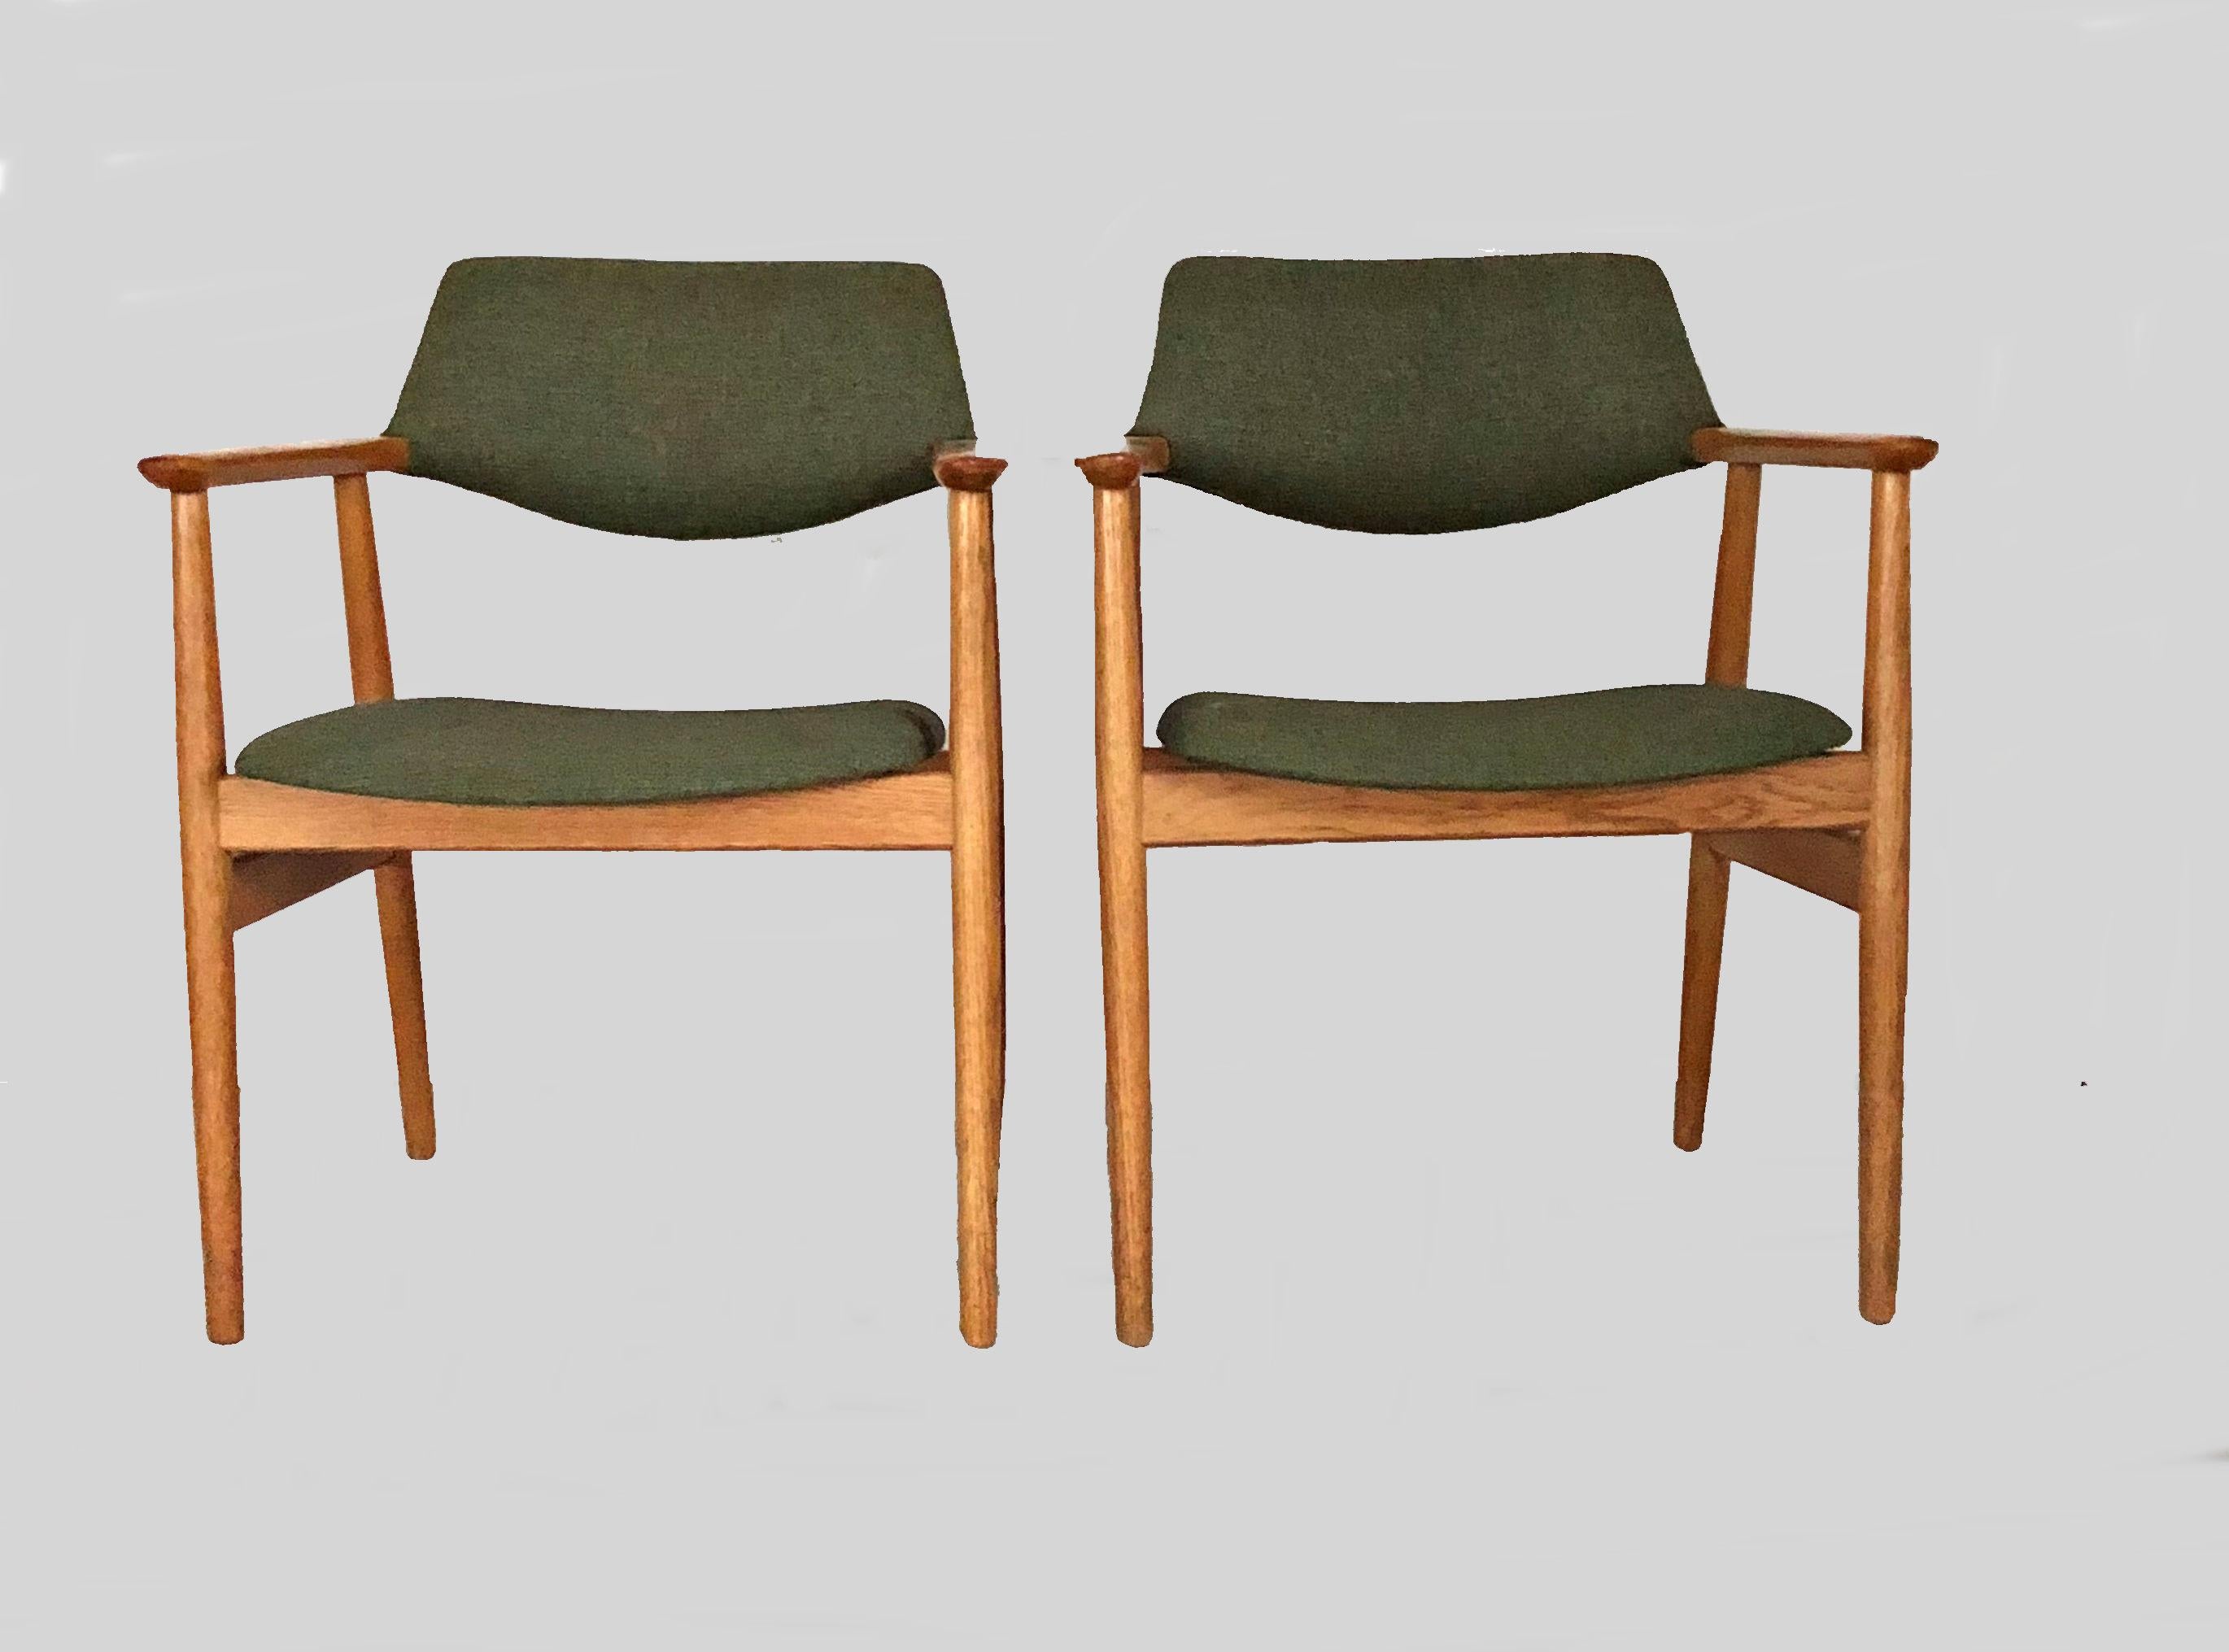 1960s Set of Two fully restored Erik Kirkegaard Oak Arm Chairs Custom Upholstery
This weeks offer as of friday November 9th. is a set of 6 elbow armchairs designed by the Danish designer Erik Kirkegaard for Høng Stolefabrik in 1956. The chairs are